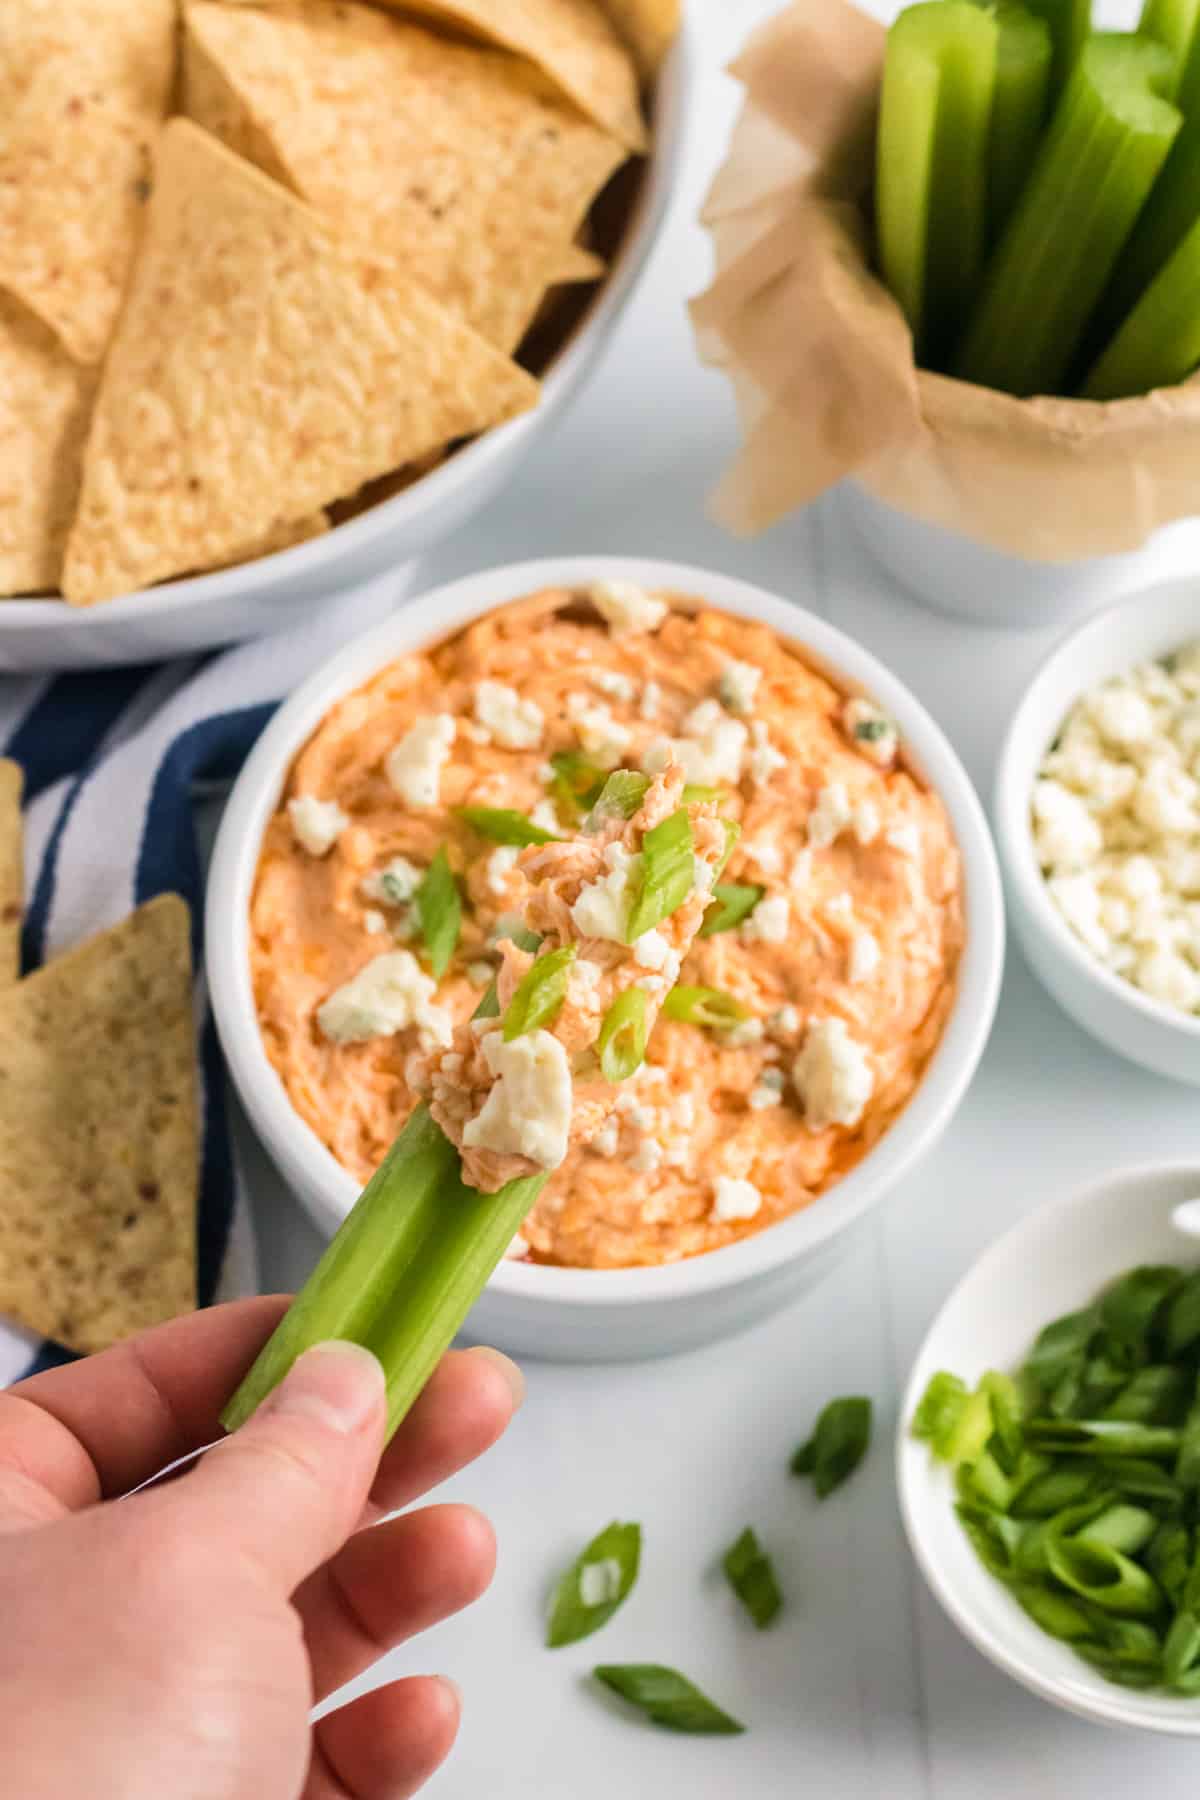 Celery stick being dipped in a bowl of cheesy buffalo chicken dip. Tortilla chips, more celery sticks, blue cheese crumbles, and scallions are in background.